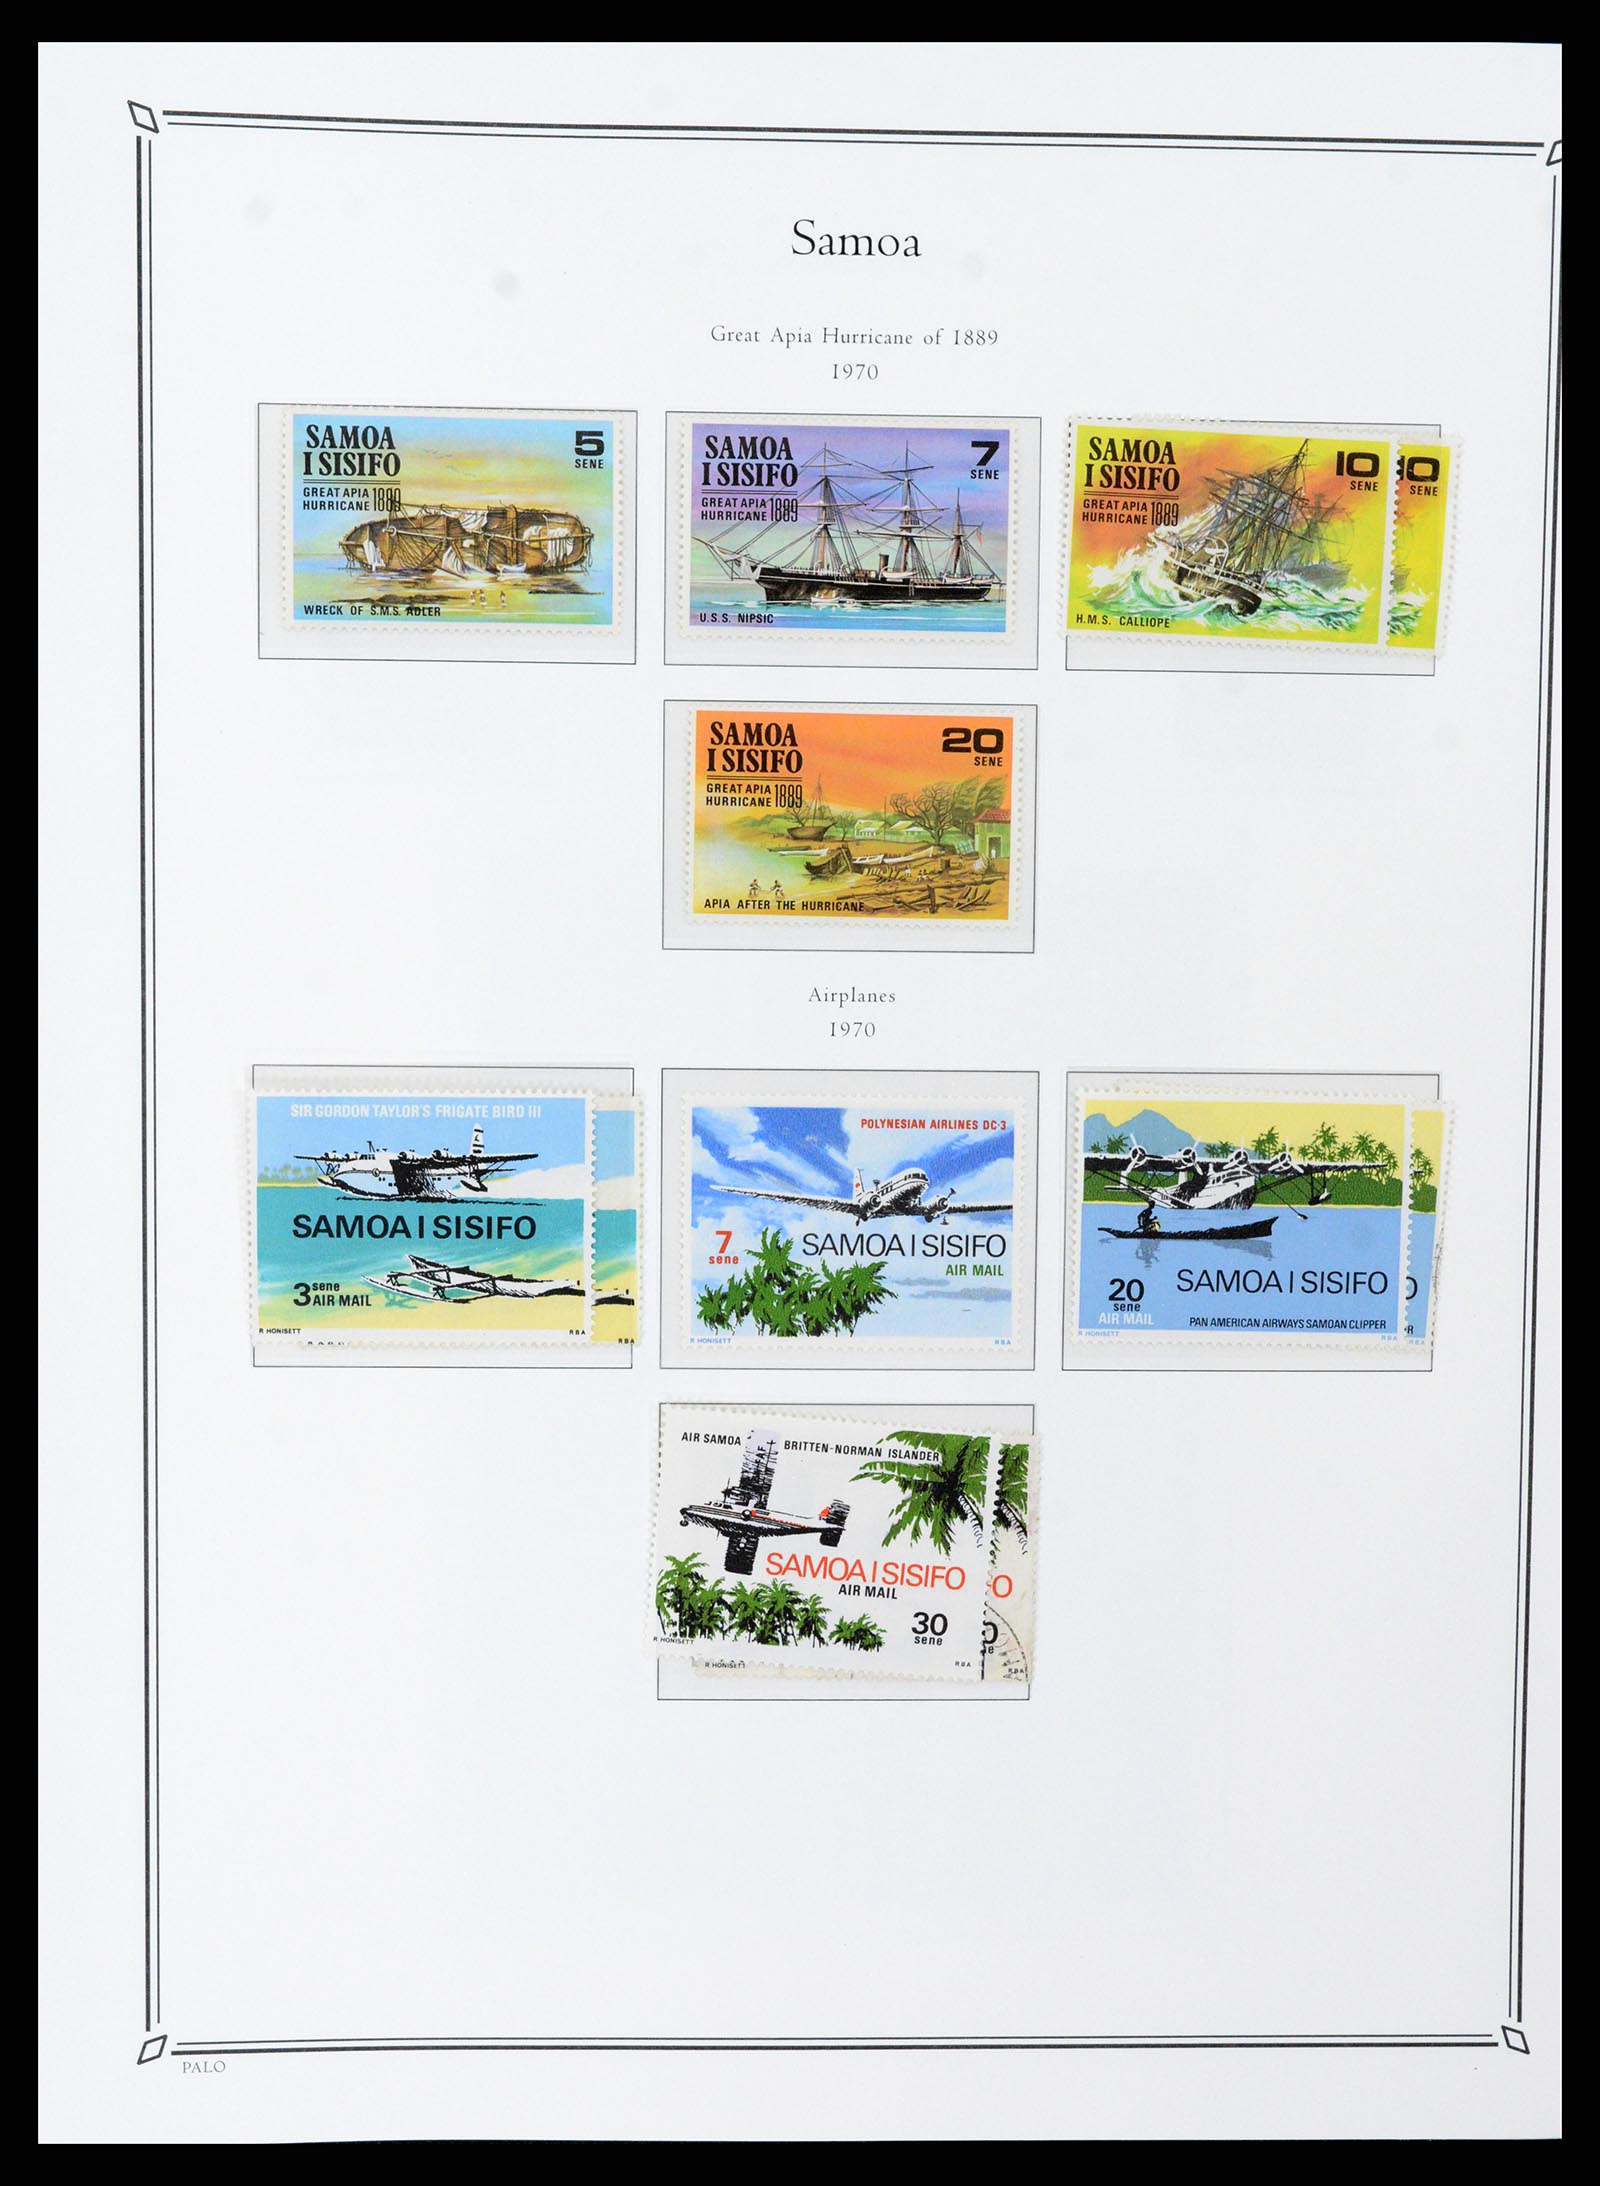 37730 327 - Stamp collection 37730 British colonies in the Pacific 1860-1970.